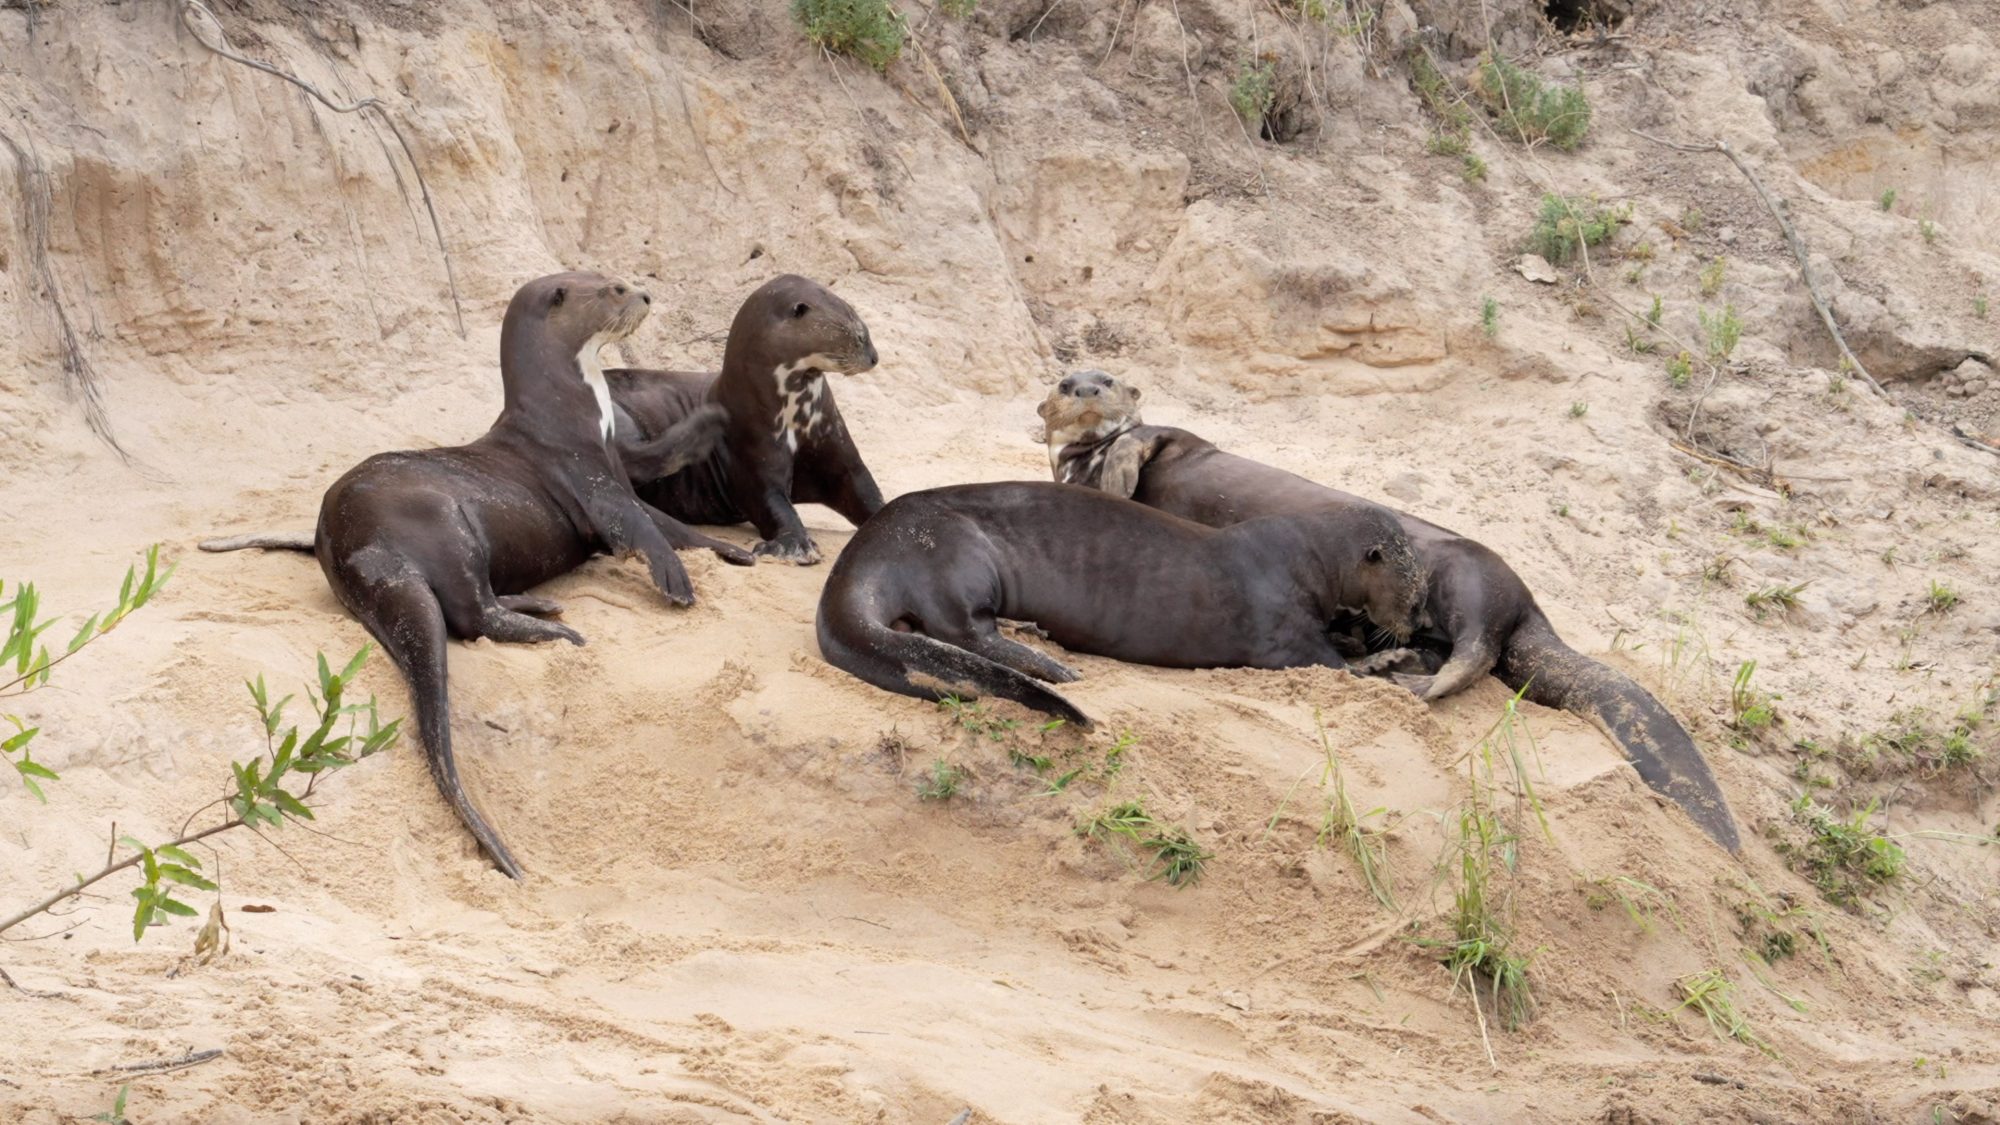 Giant River Otters on the river bank – Pantanal, Brazil 2022